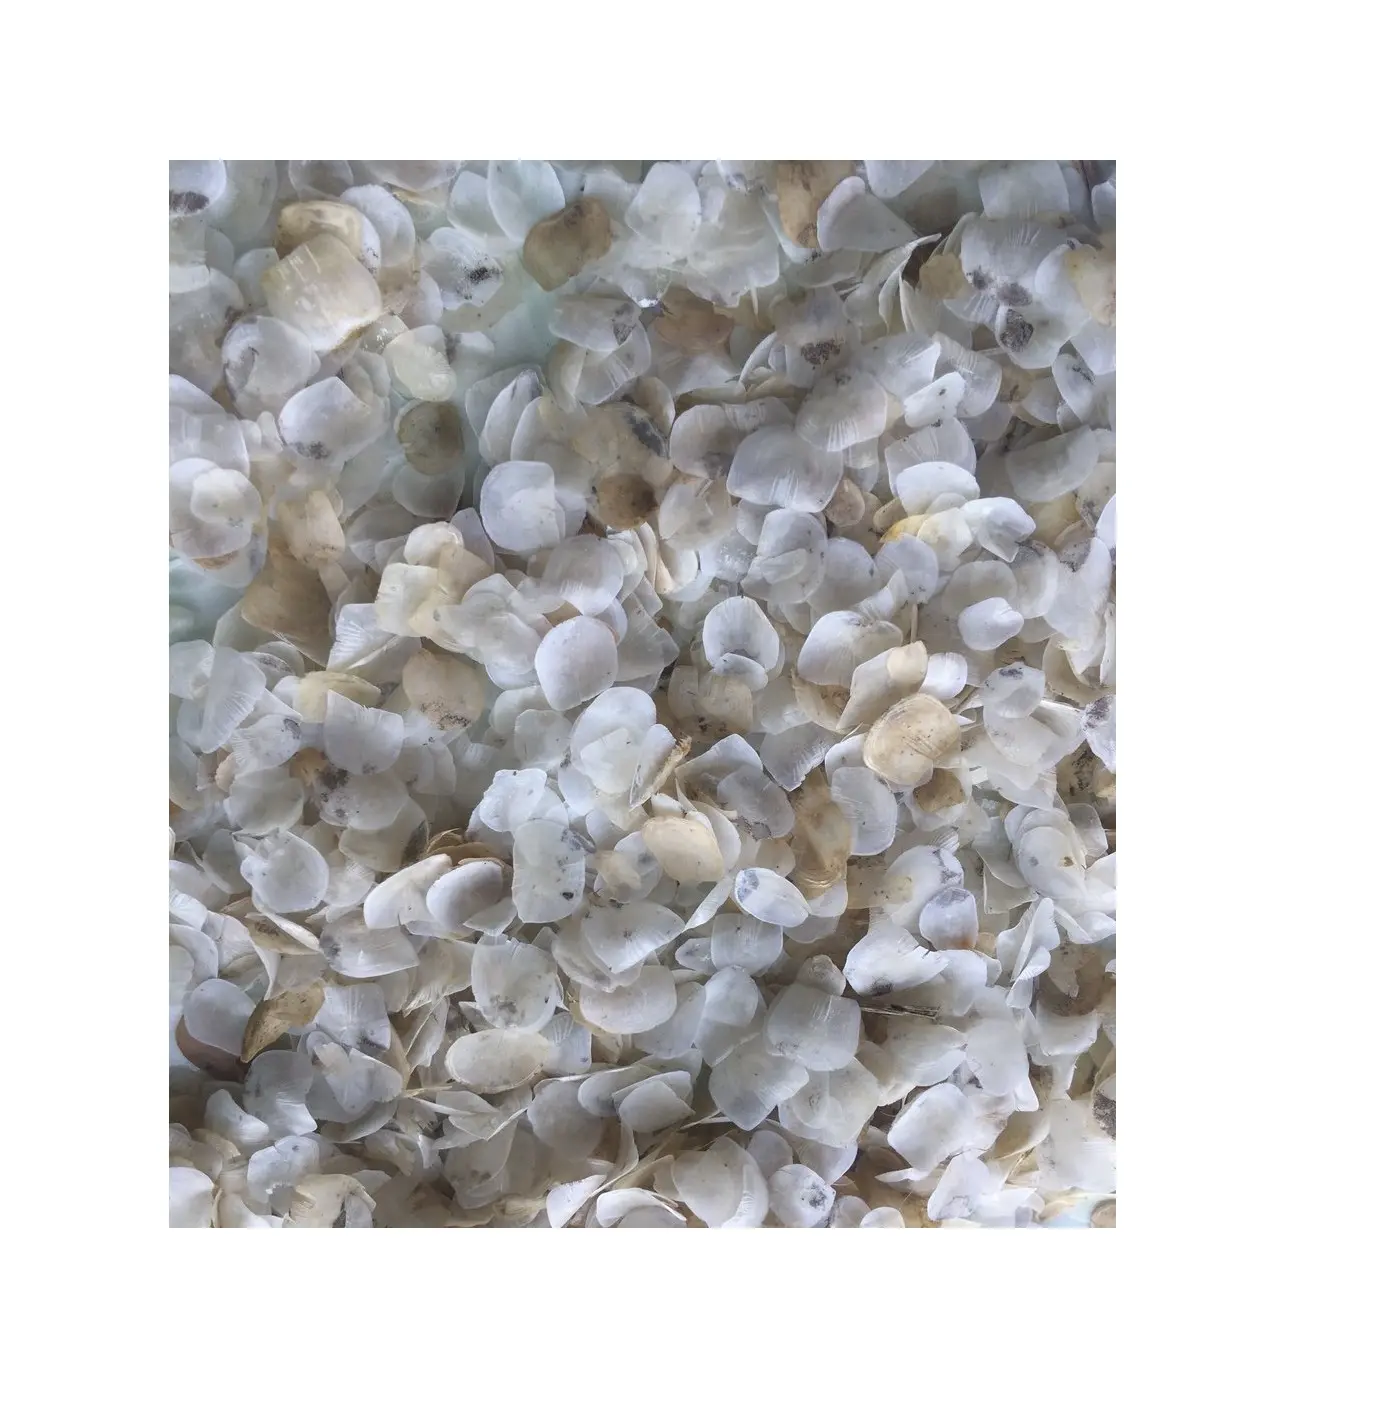 Dried fish scales Dried Fish Scales For Collagen With The Best Price In Vietnam ( Annie 0084702917076 WA) 99 Gold Data